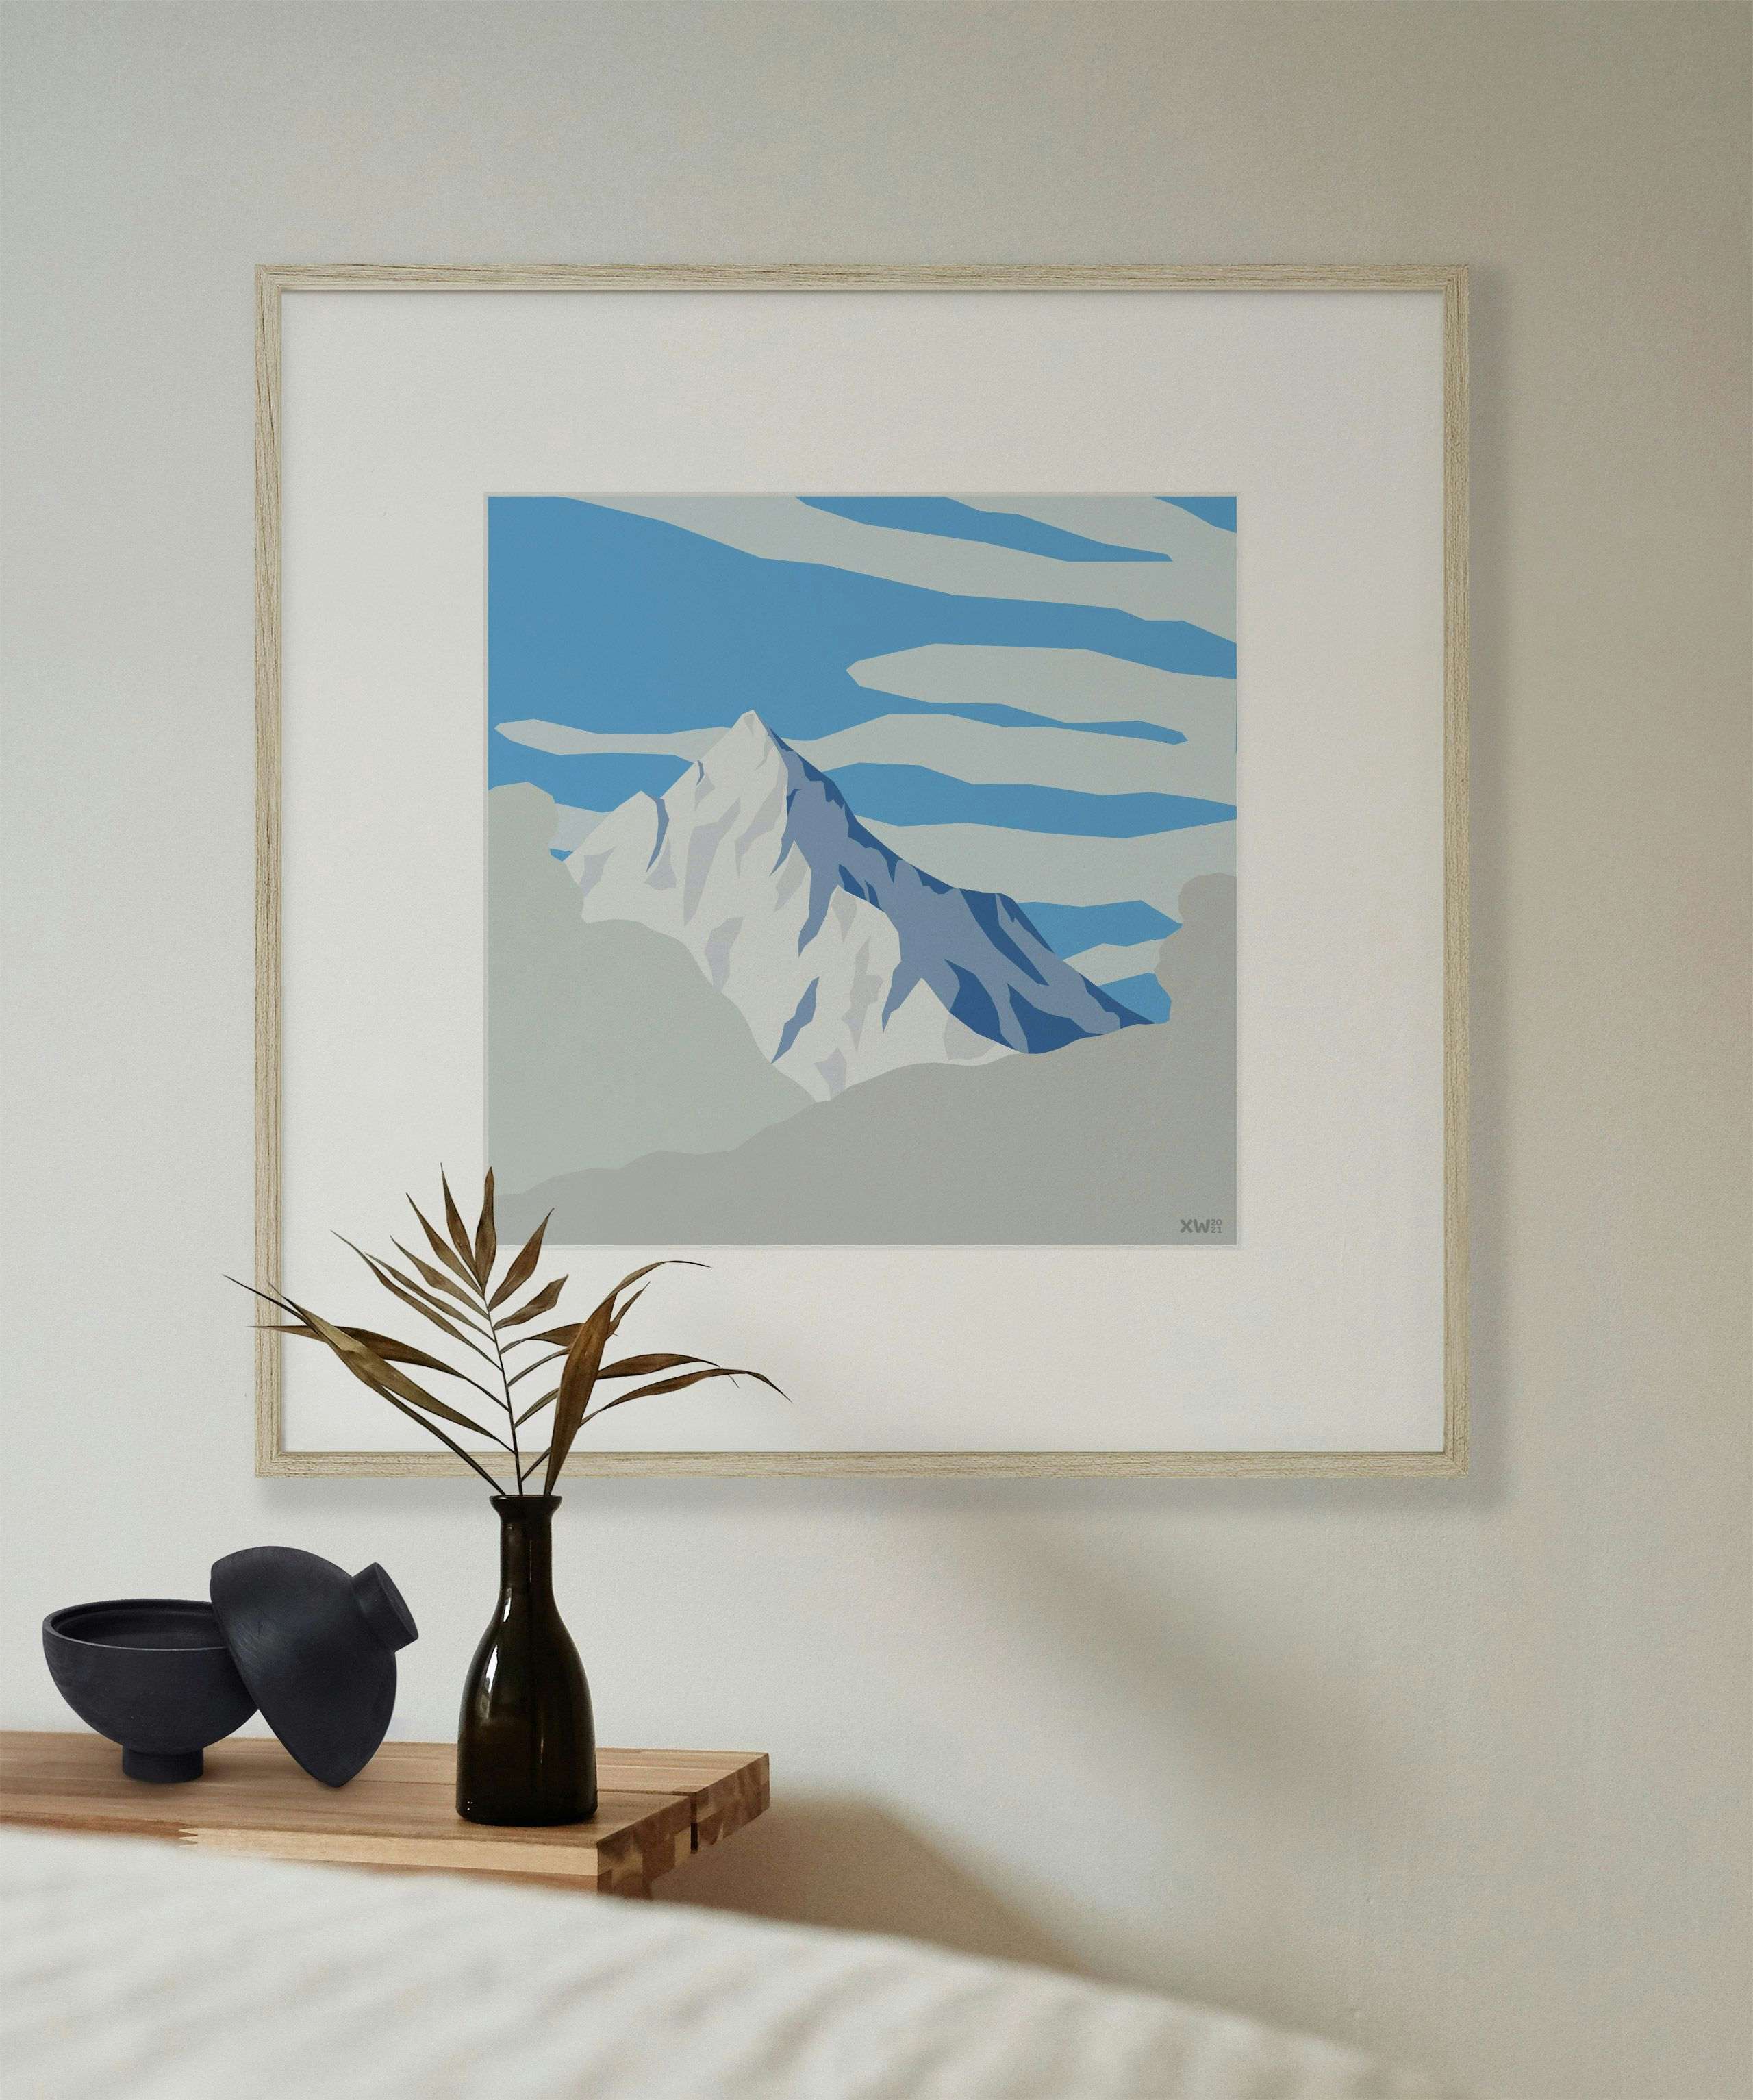 Winter views of Mont Charvin from Les Saisies. Minimalist mountain wall art by Xavier Wendling.